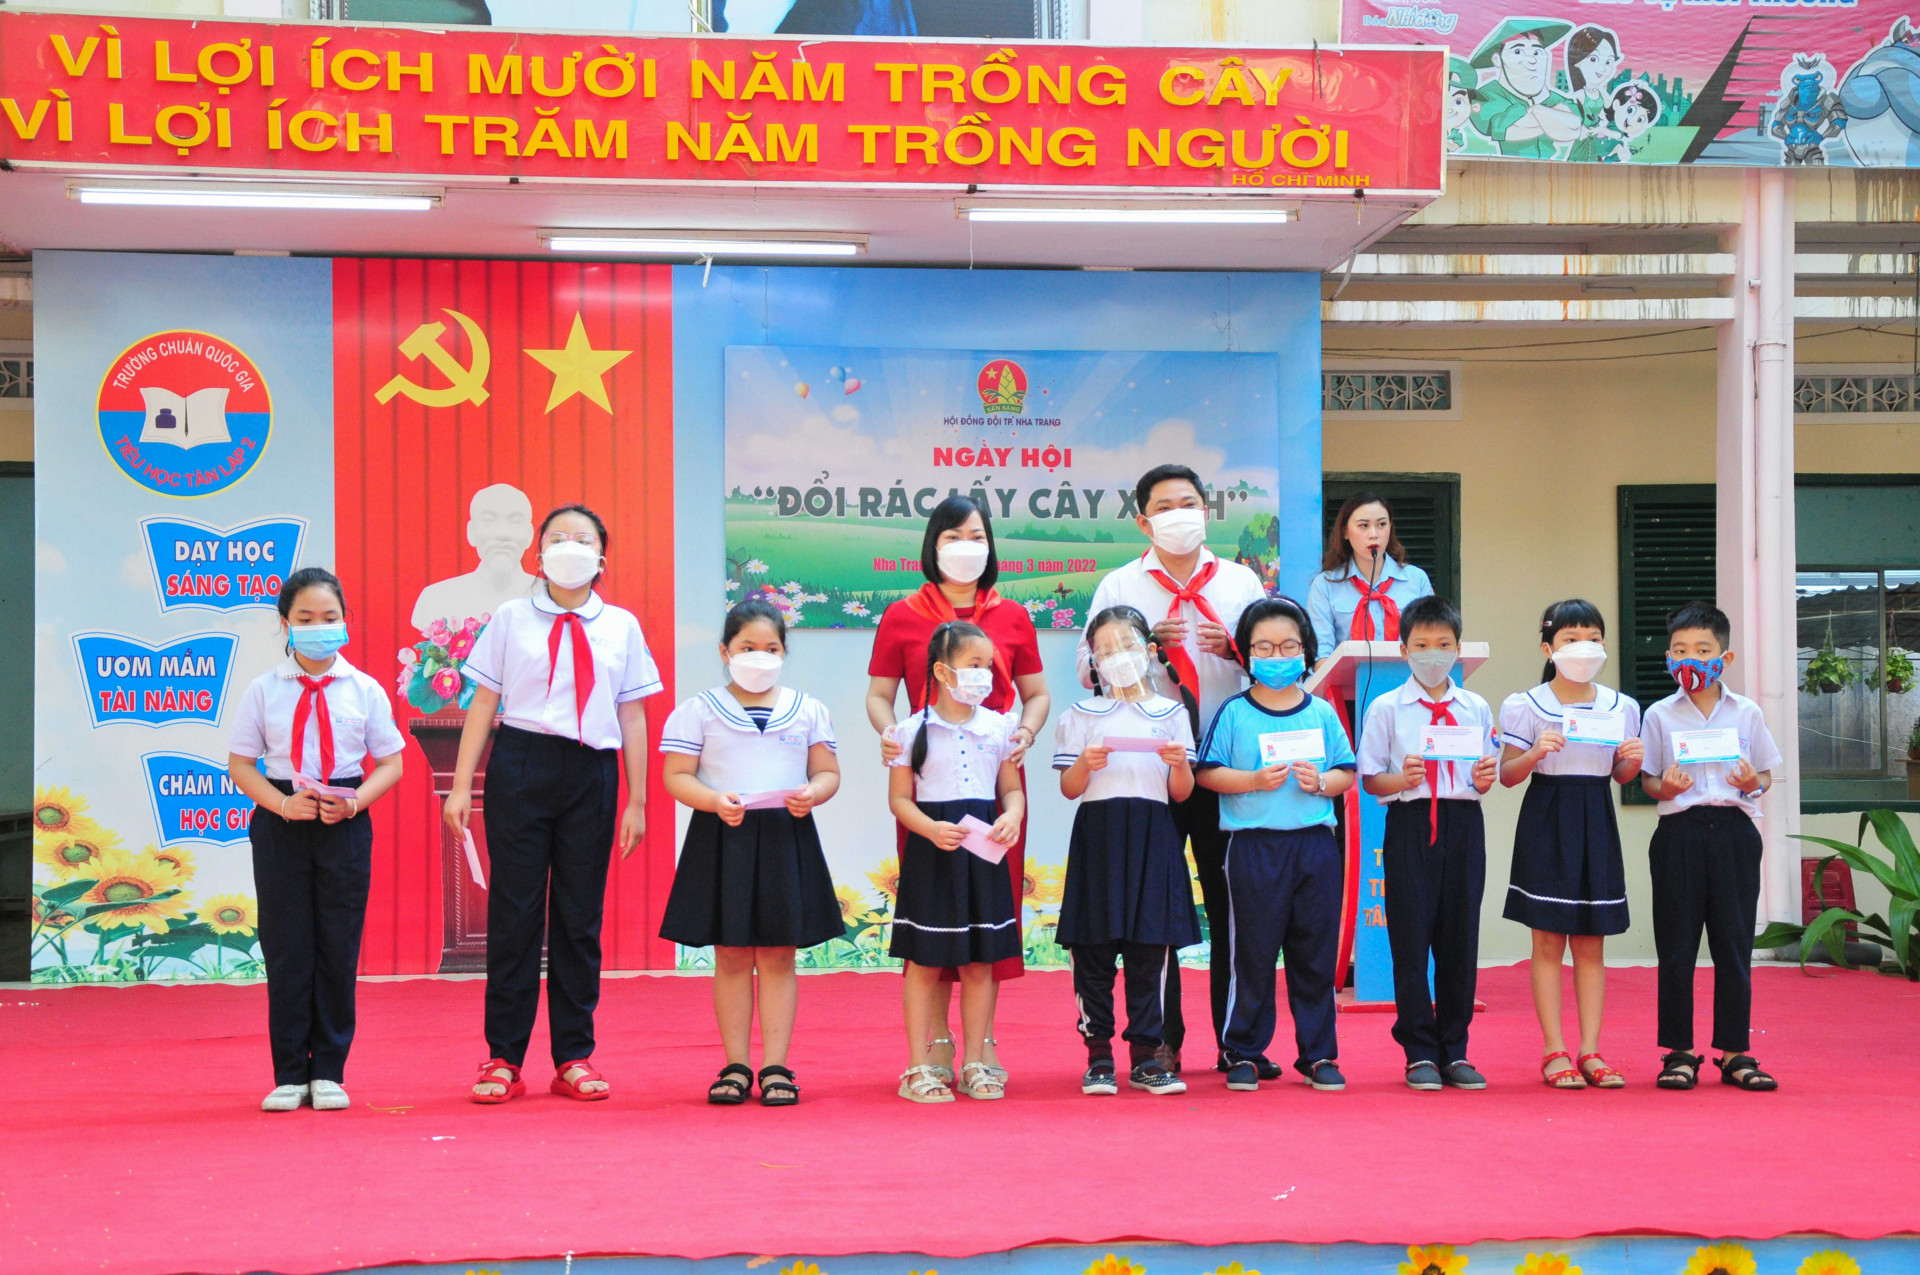 Nha Trang City Council of Ho Chi Minh Young Pioneer Organization give 10 scholarships of VND500,000 each to disadvantaged students of Tan Lap 2 Primary School.